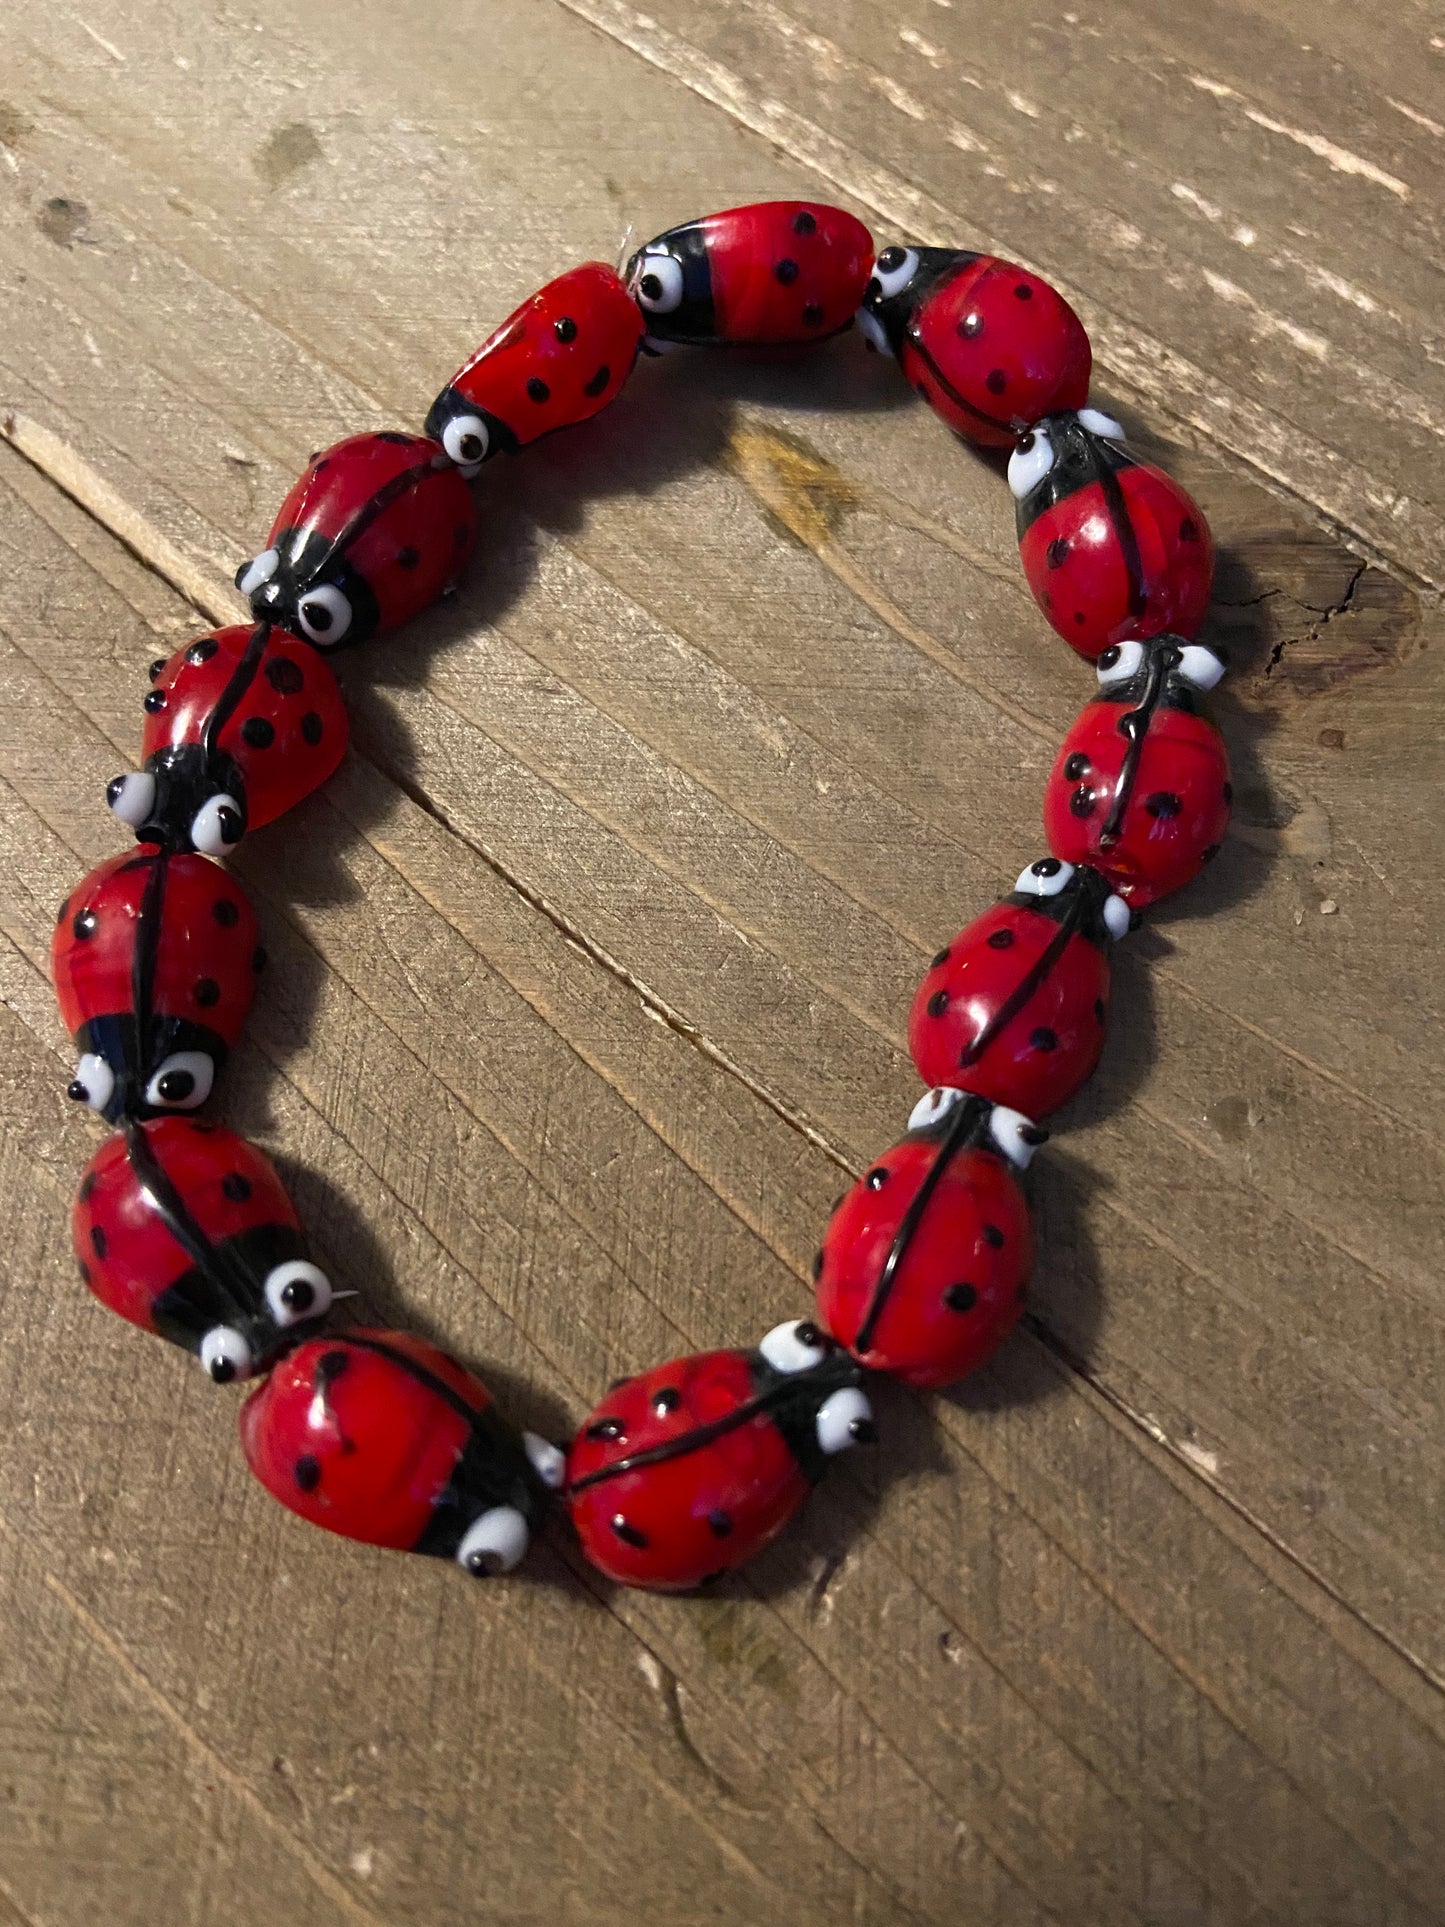 Glass Ladybug Beaded Elastic Bracelet - Add a Whimsical Touch to Your Spring Look - Handcrafted Fashion Jewelry